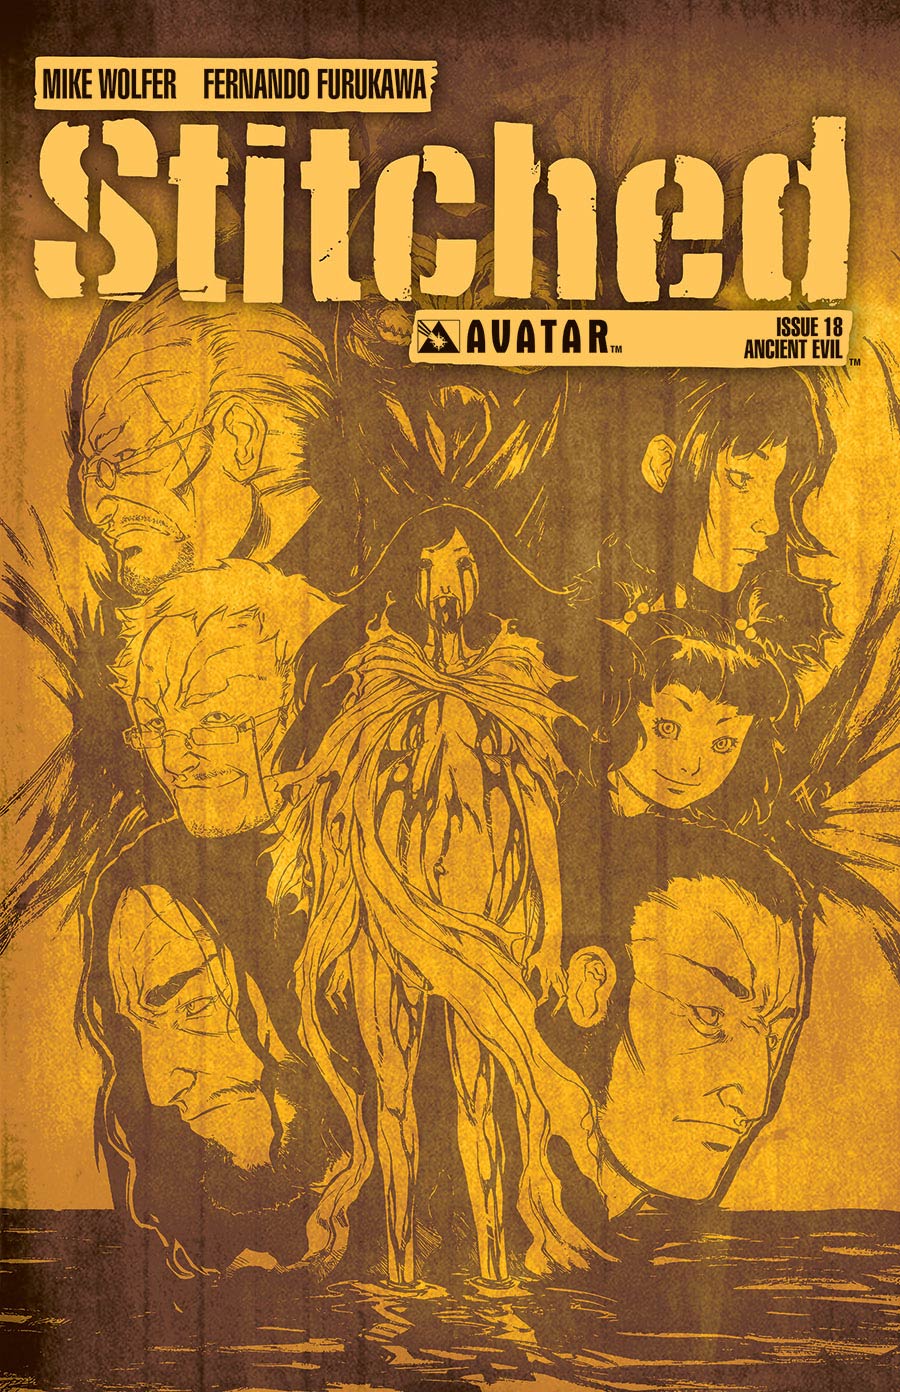 Stitched #18 Ancient Evil Cover (Sale Edition)